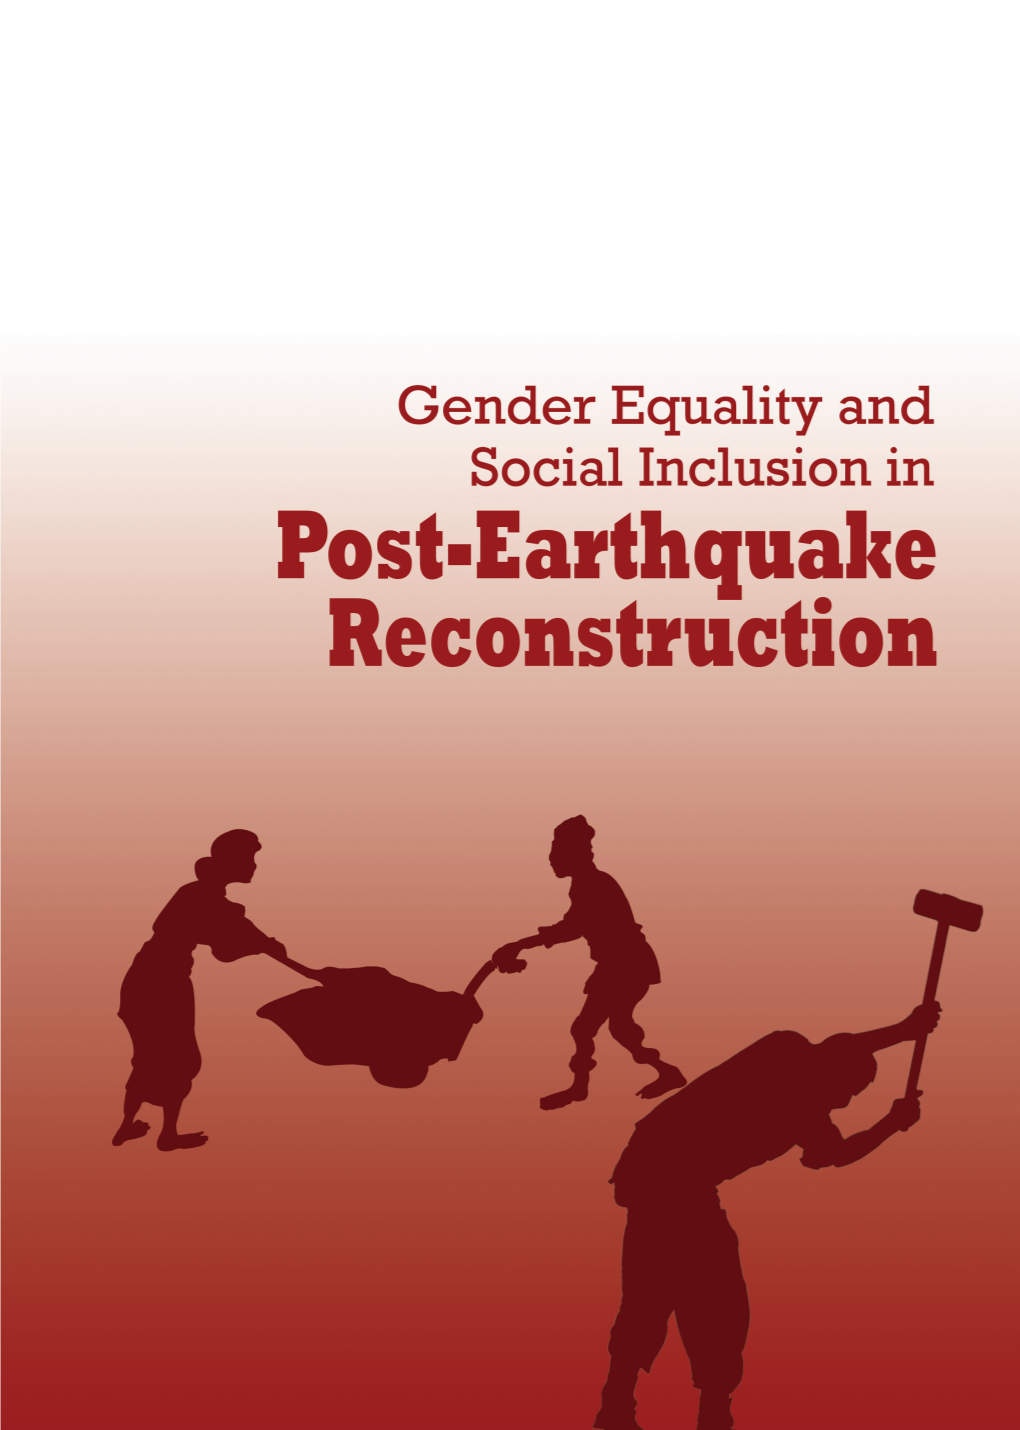 Gender Equality and Social Inclusion in Post-Earthquake Reconstruction 1 STUDY TEAM